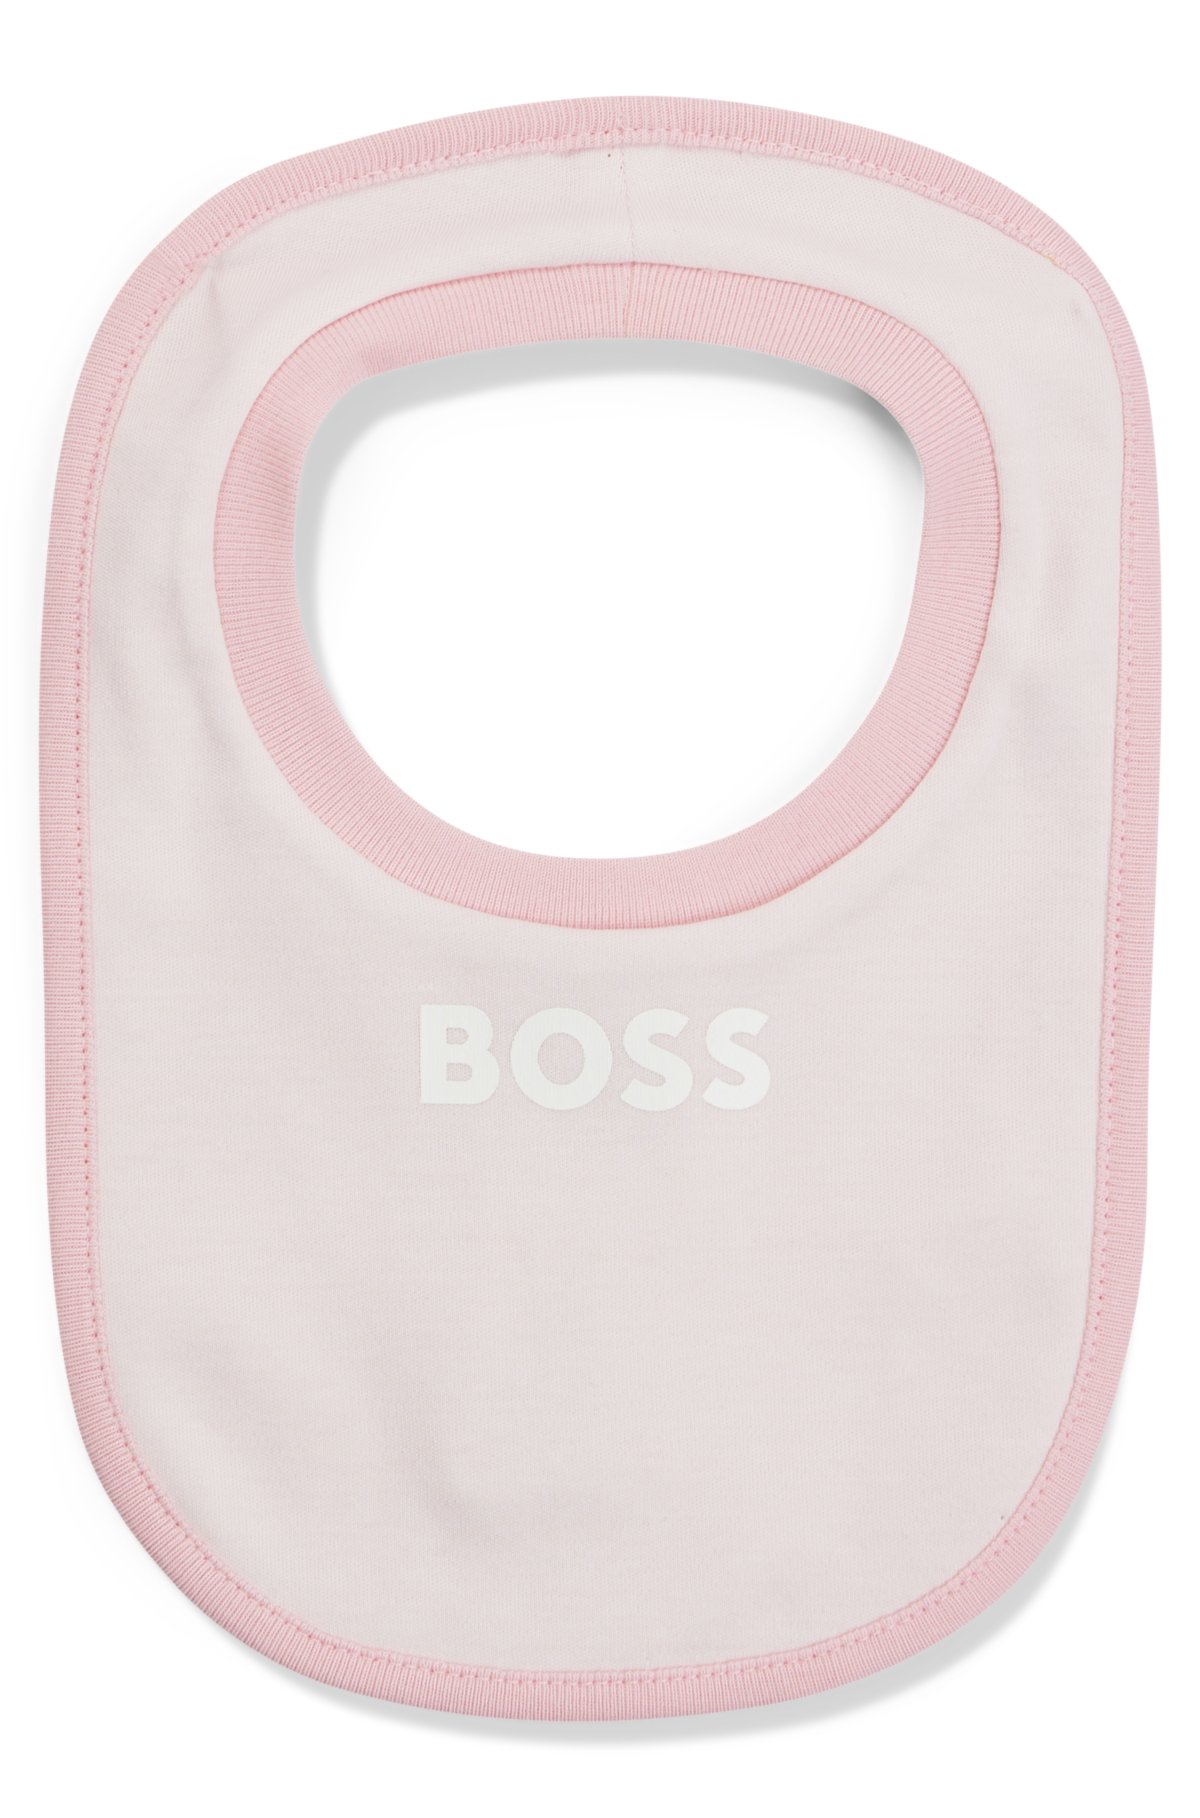 Gift-boxed sleepsuit and bib set for babies, light pink